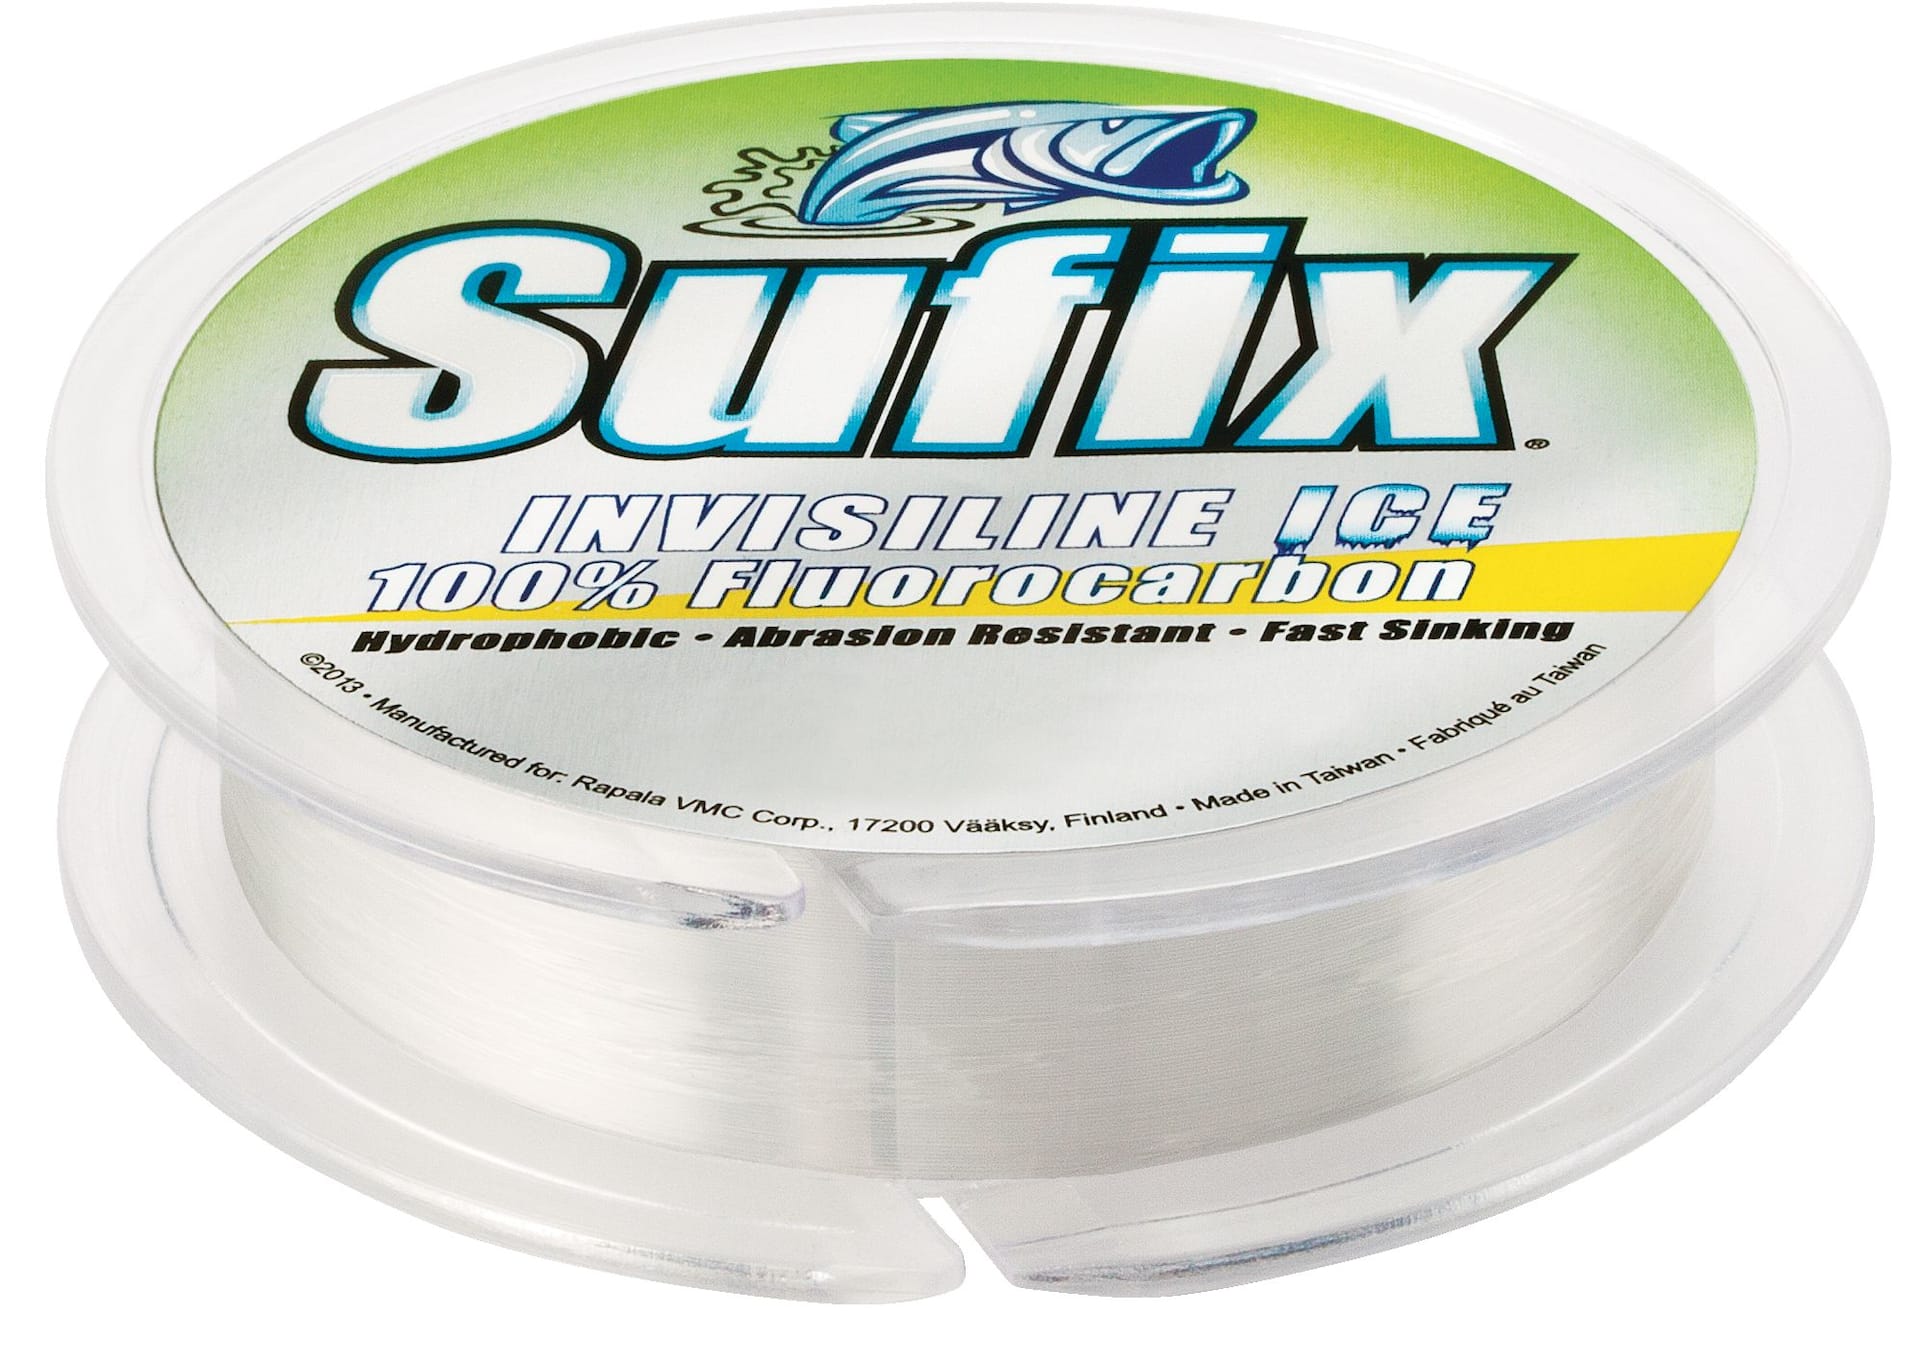 https://media-www.canadiantire.ca/product/playing/fishing/ice-fishing/0777846/sufix-invisiline-ice-fluorocarbon-fishing-line-2lb-5f3dc1bc-9097-47b7-b372-71df7b38d4f5-jpgrendition.jpg